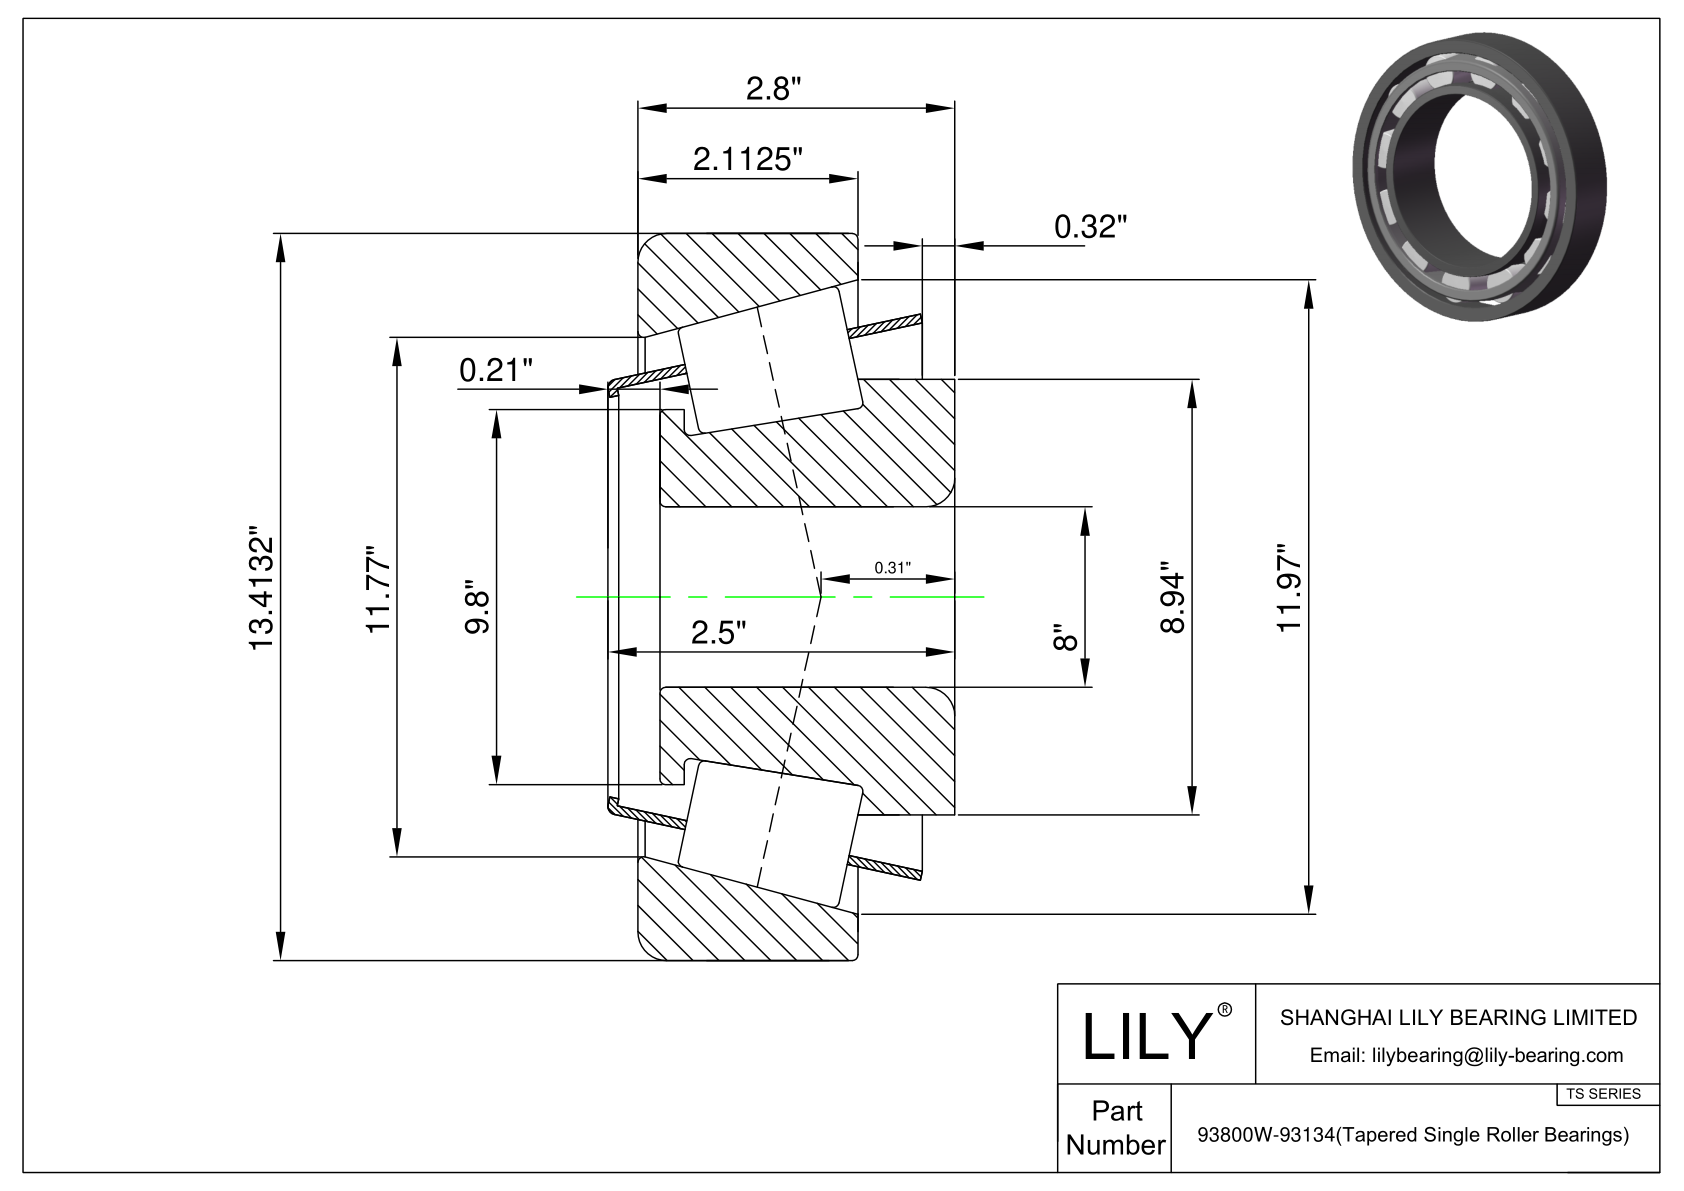 93800W-93134 TS (Tapered Single Roller Bearings) (Imperial) cad drawing